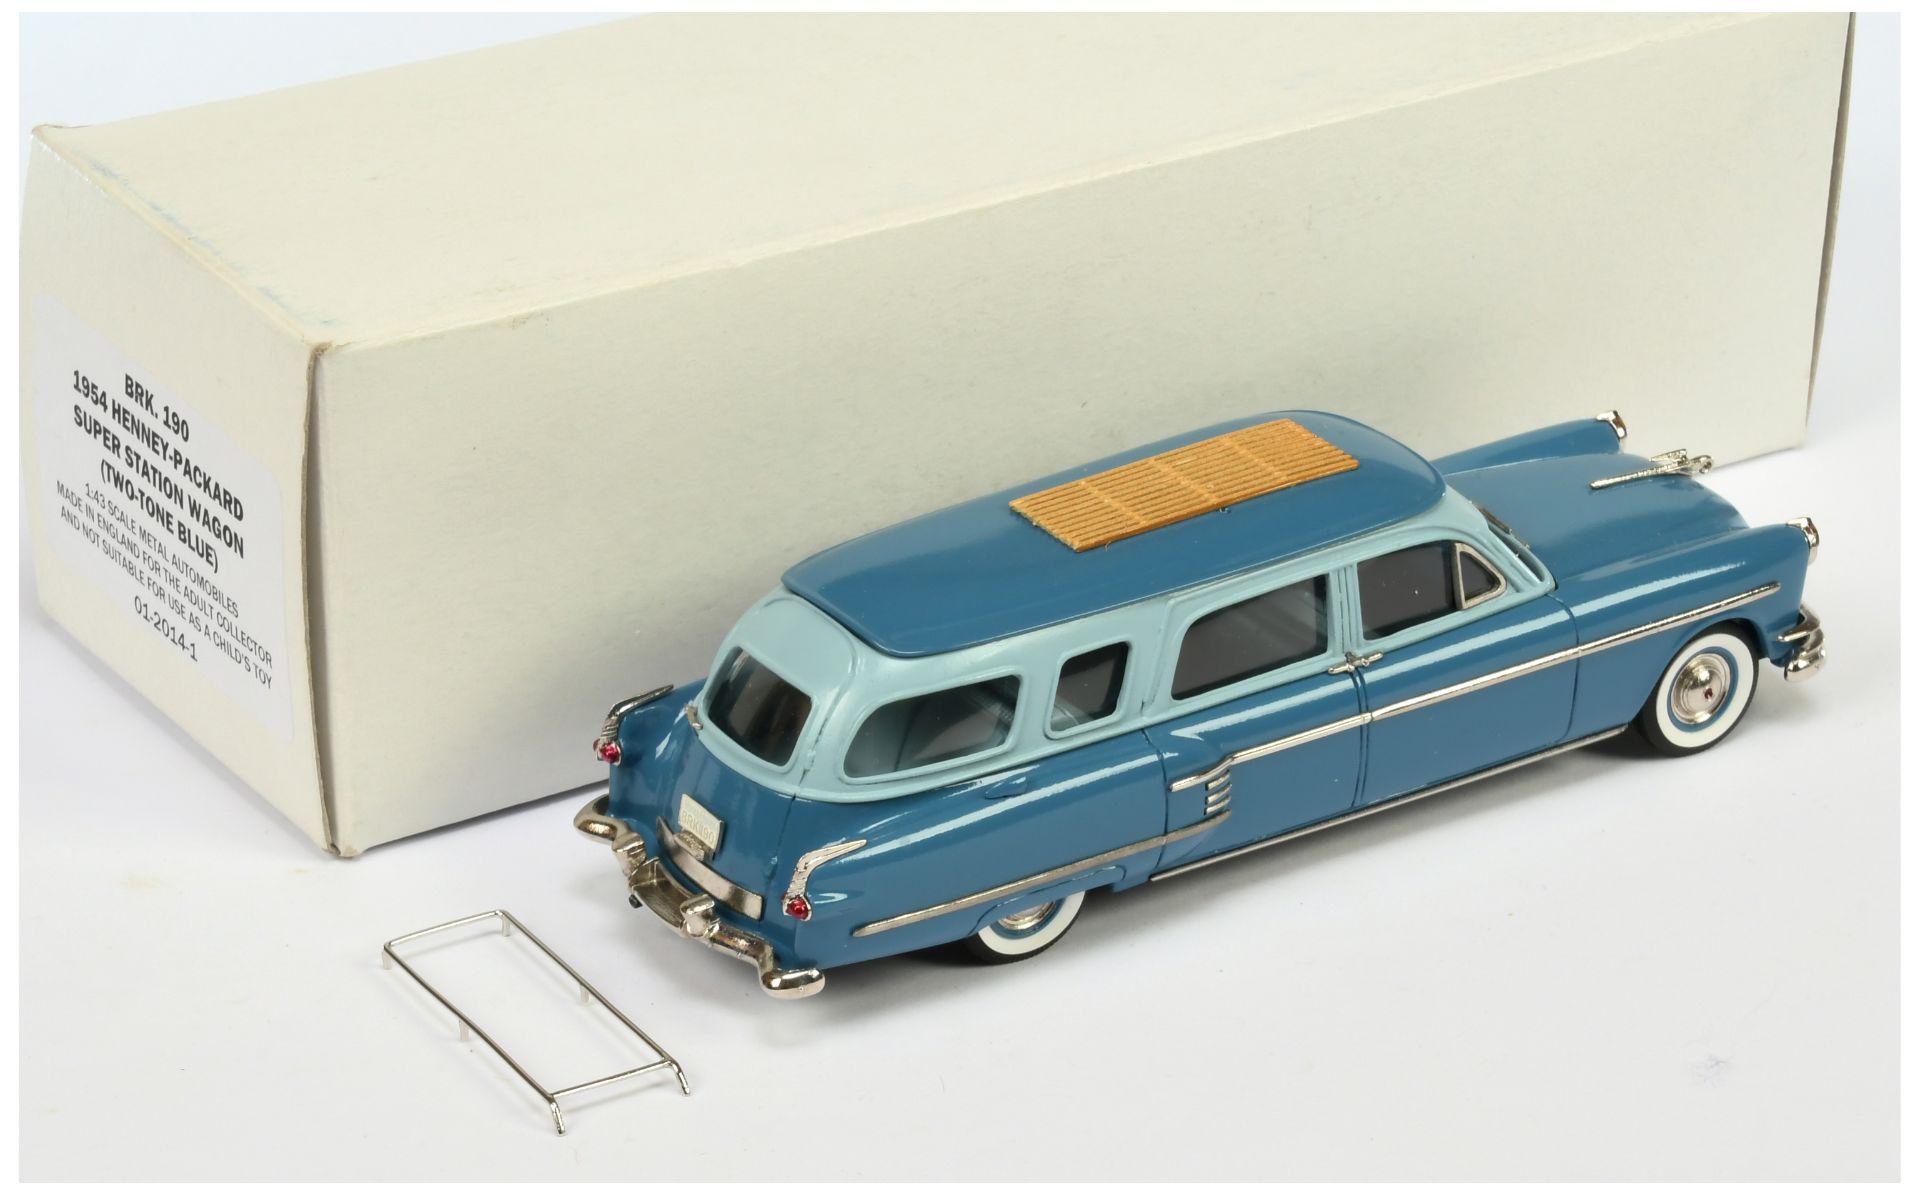 1954 Henney-Packard Super Station Wagon (two tone blue), BRK.190 - - Image 2 of 2